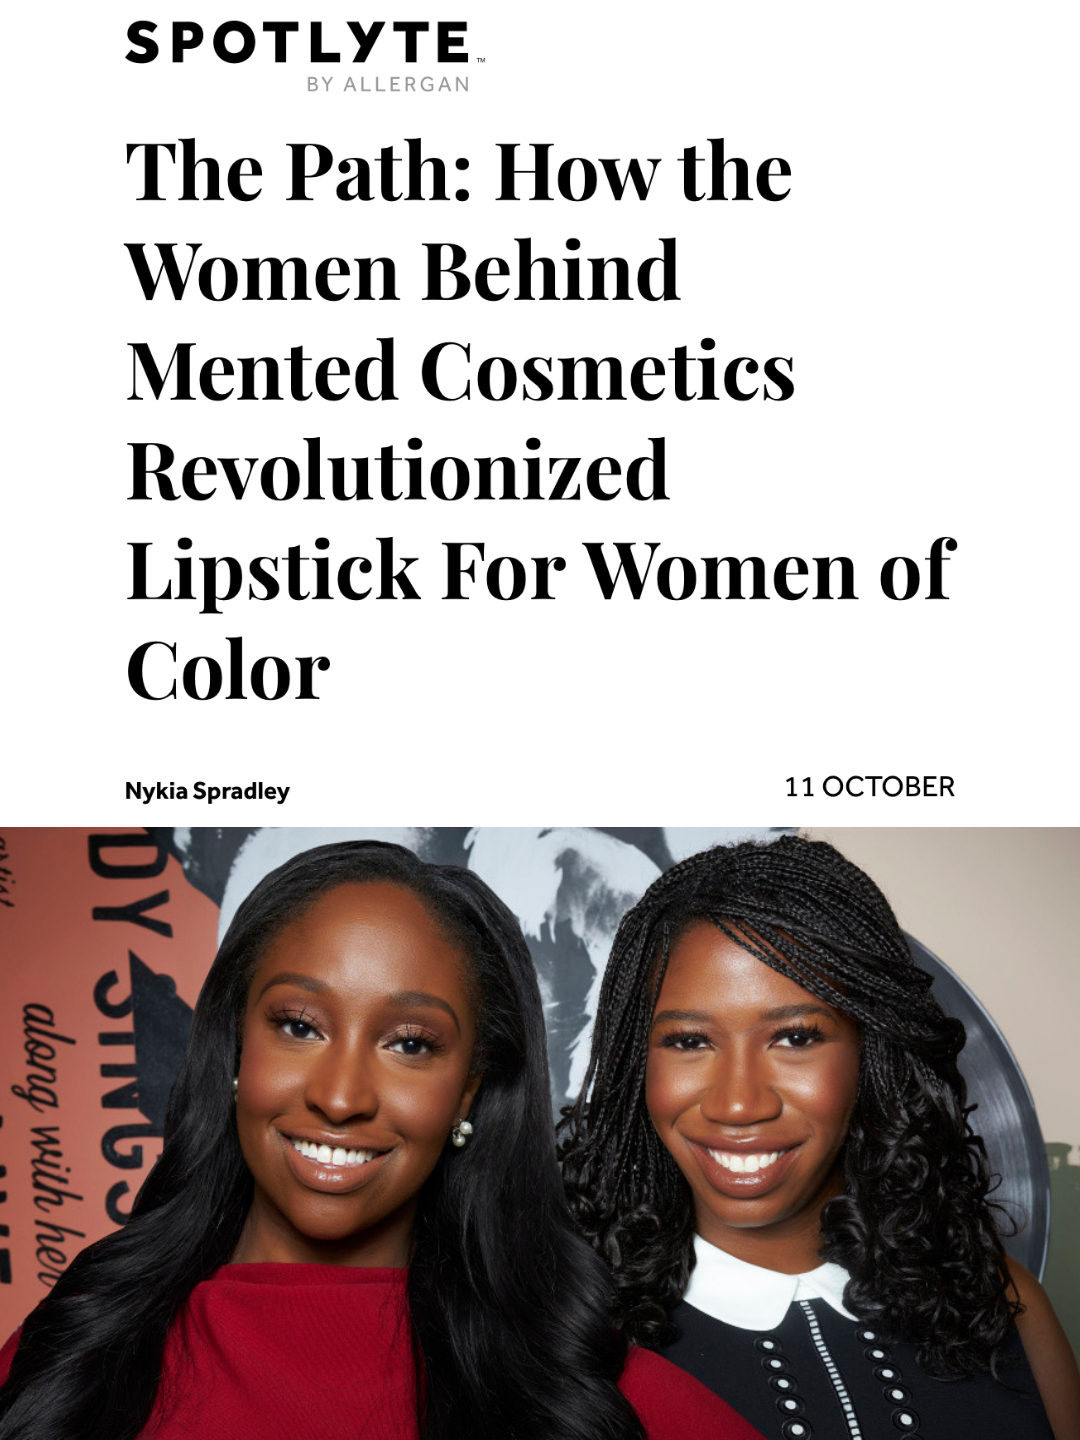 The Path: How the Women Behind Mented Cosmetics Revolutionized Lipstick For Women of Color